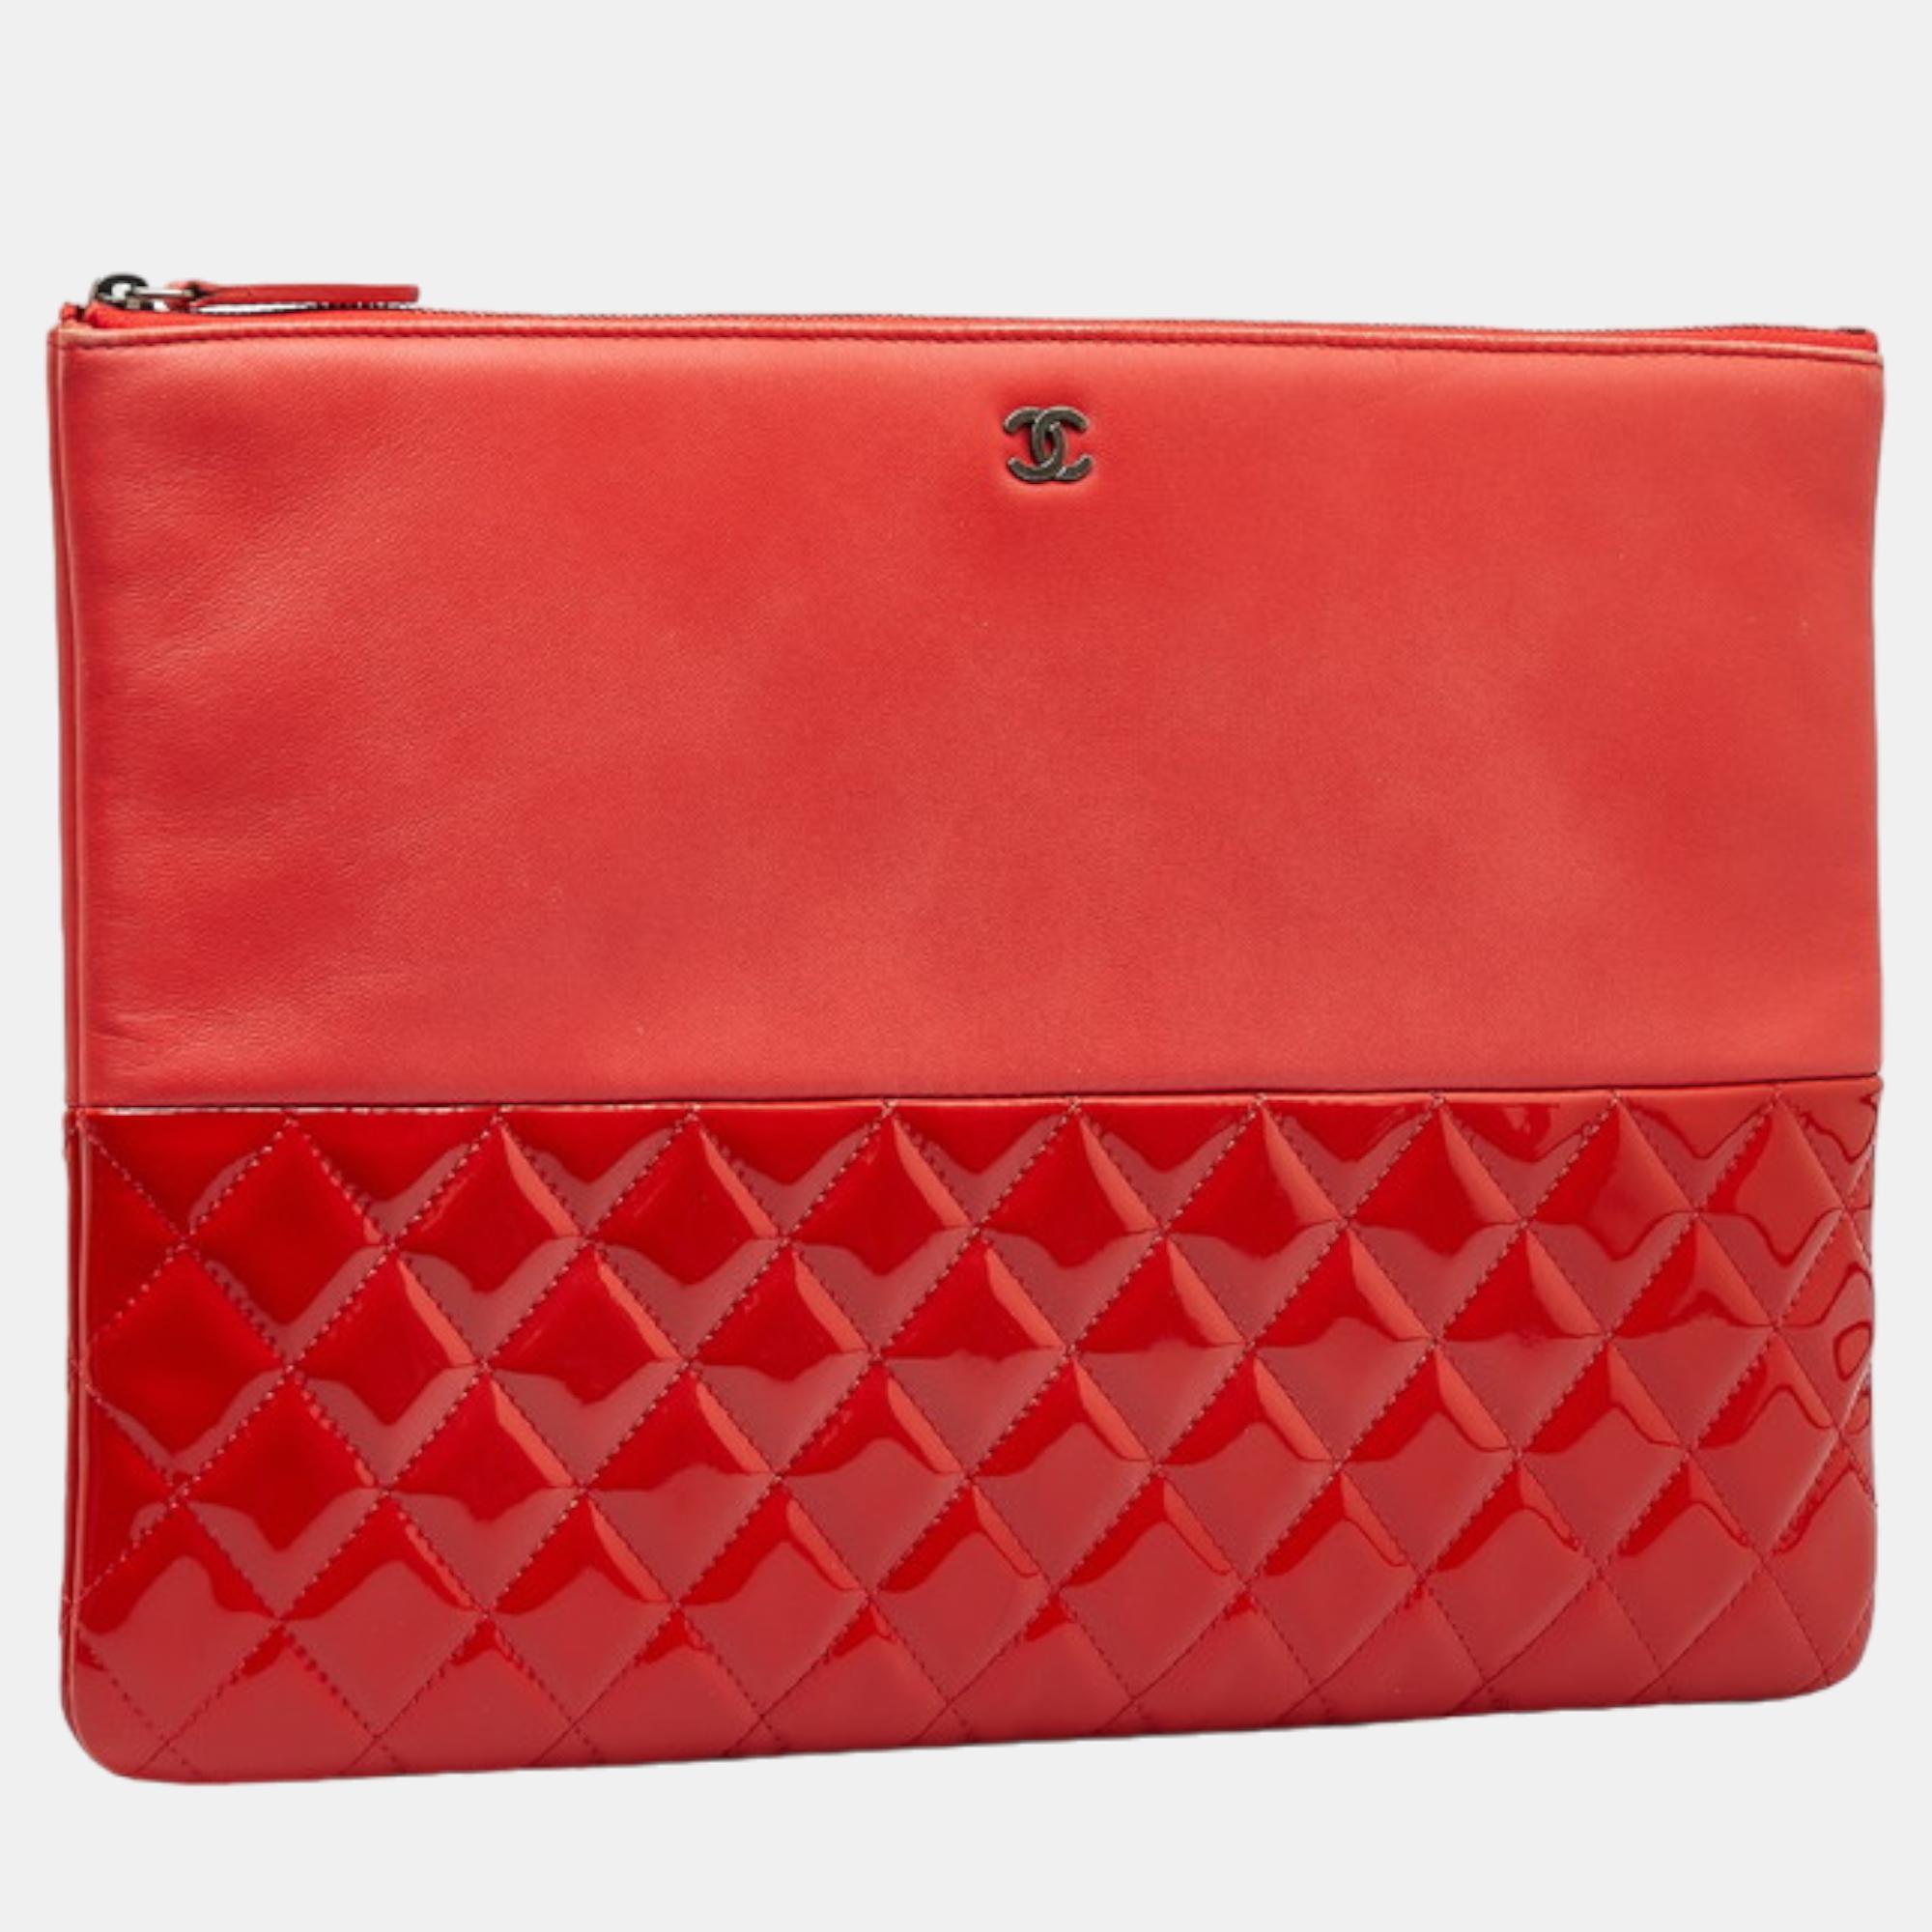 Chanel Red Patent Leather Large Gabrielle O-Case Pouch